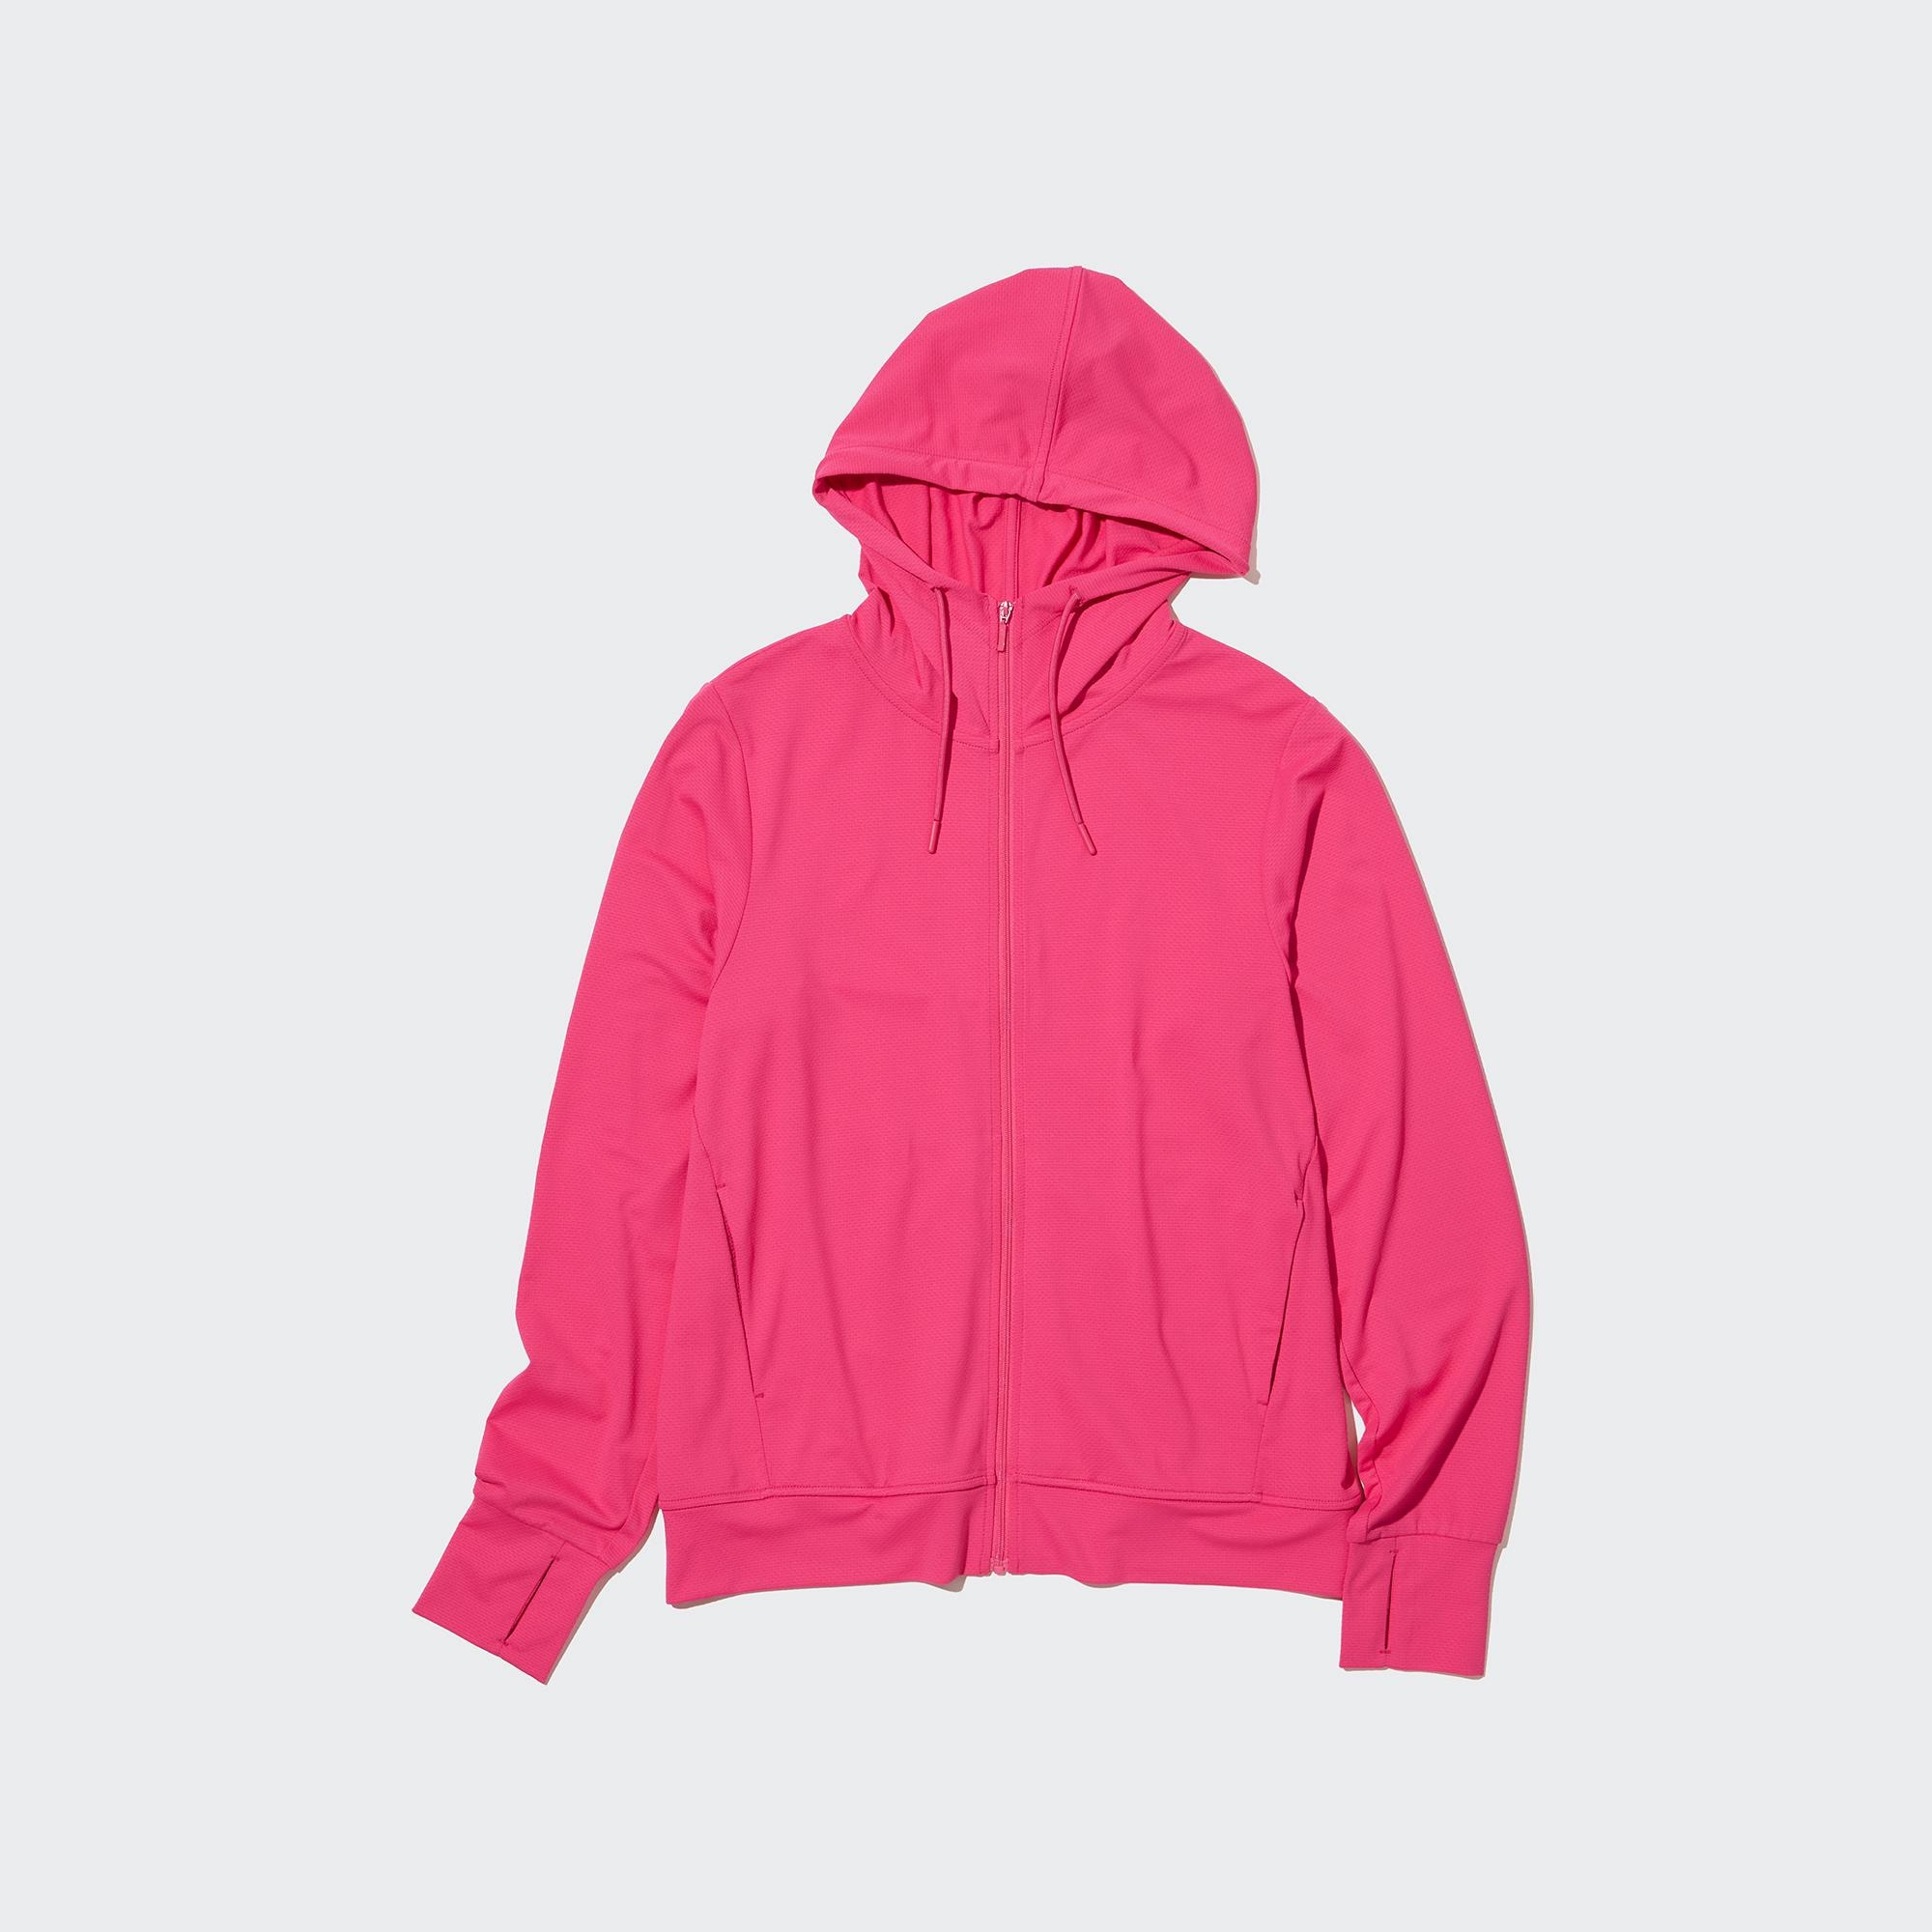 A Lightweight Jacket Uniqlo AIRism UV Protection Mesh Hoodie  Uniqlo Has  All the BacktoSchool Basics Your Kids Will Love  POPSUGAR Family Photo 8